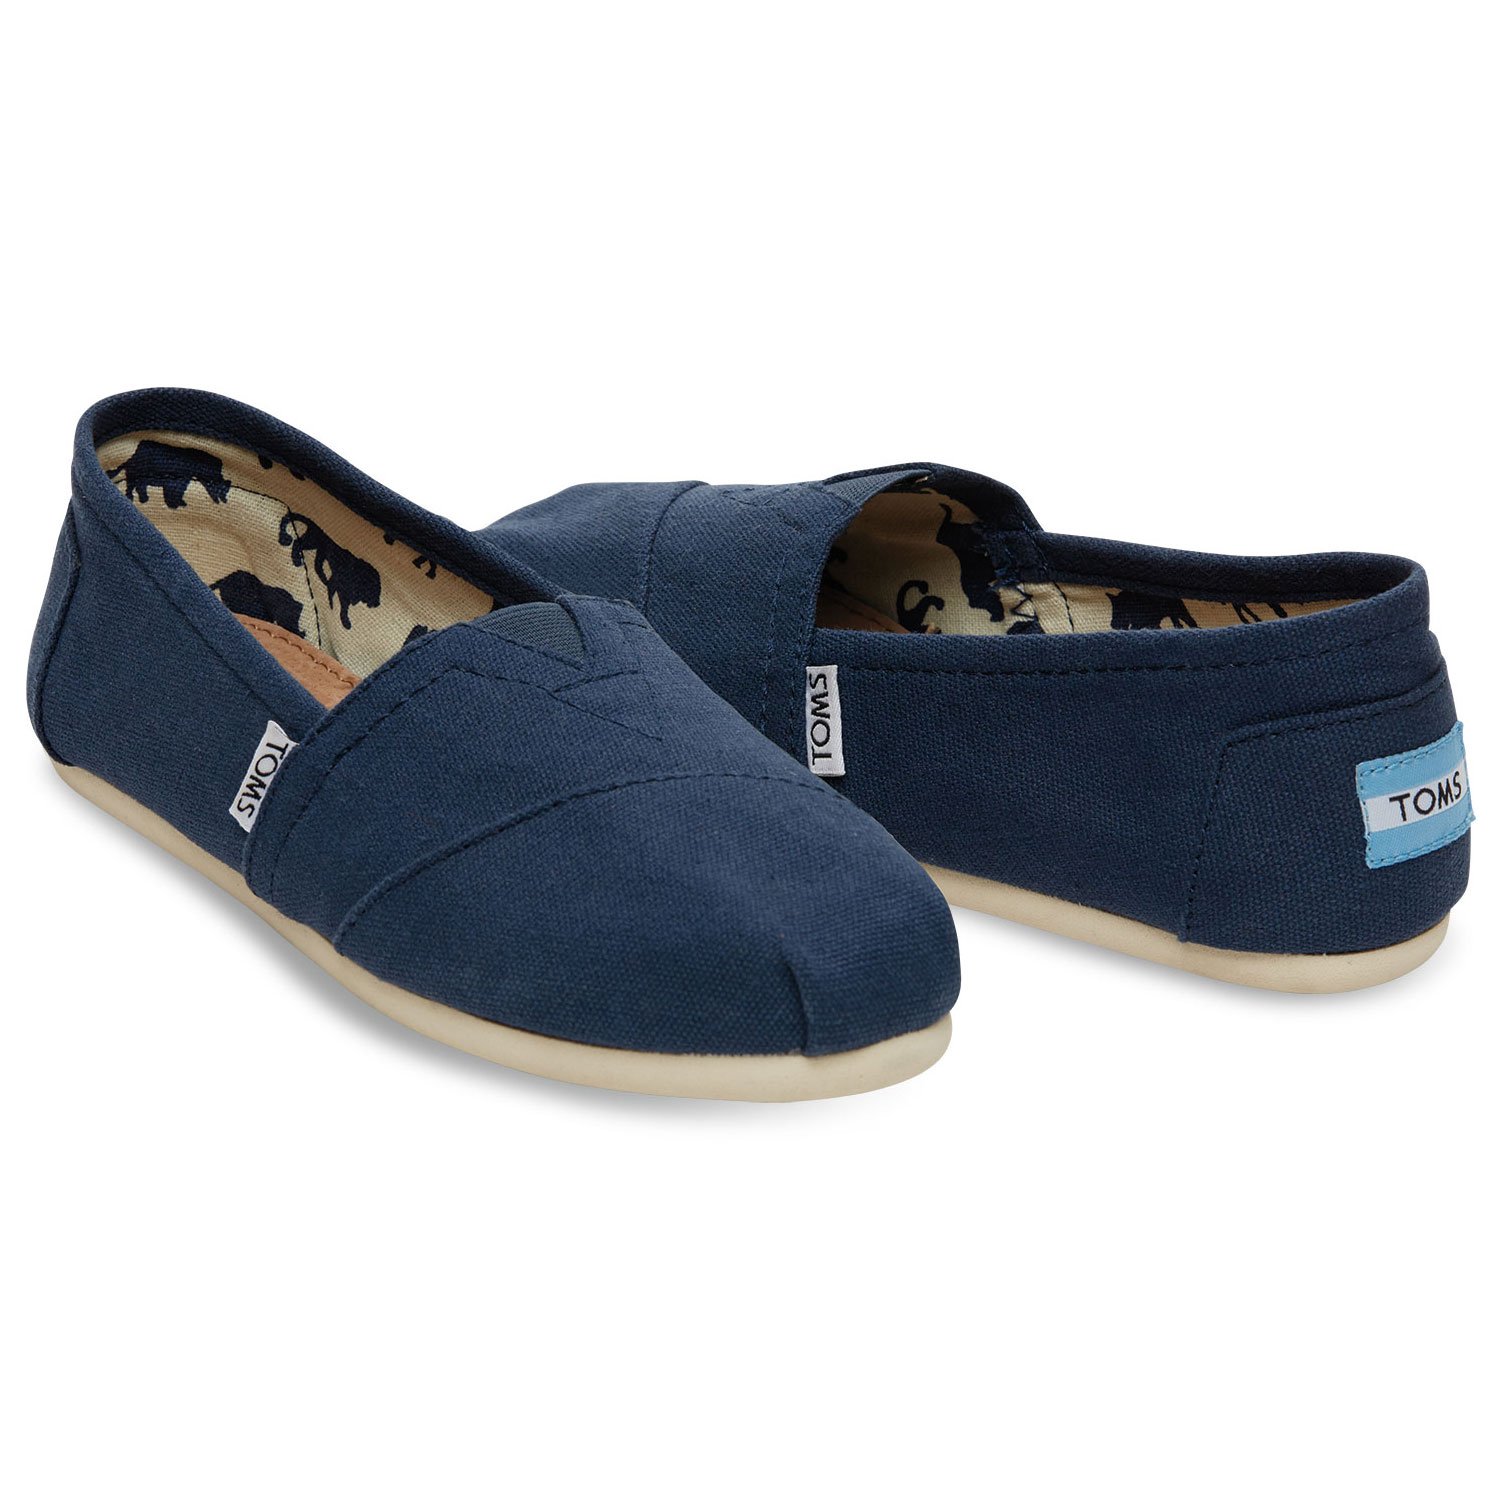 Toms Women's Shoes classic Low Top Slip On Fashion Sneakers, Navy, Size ...